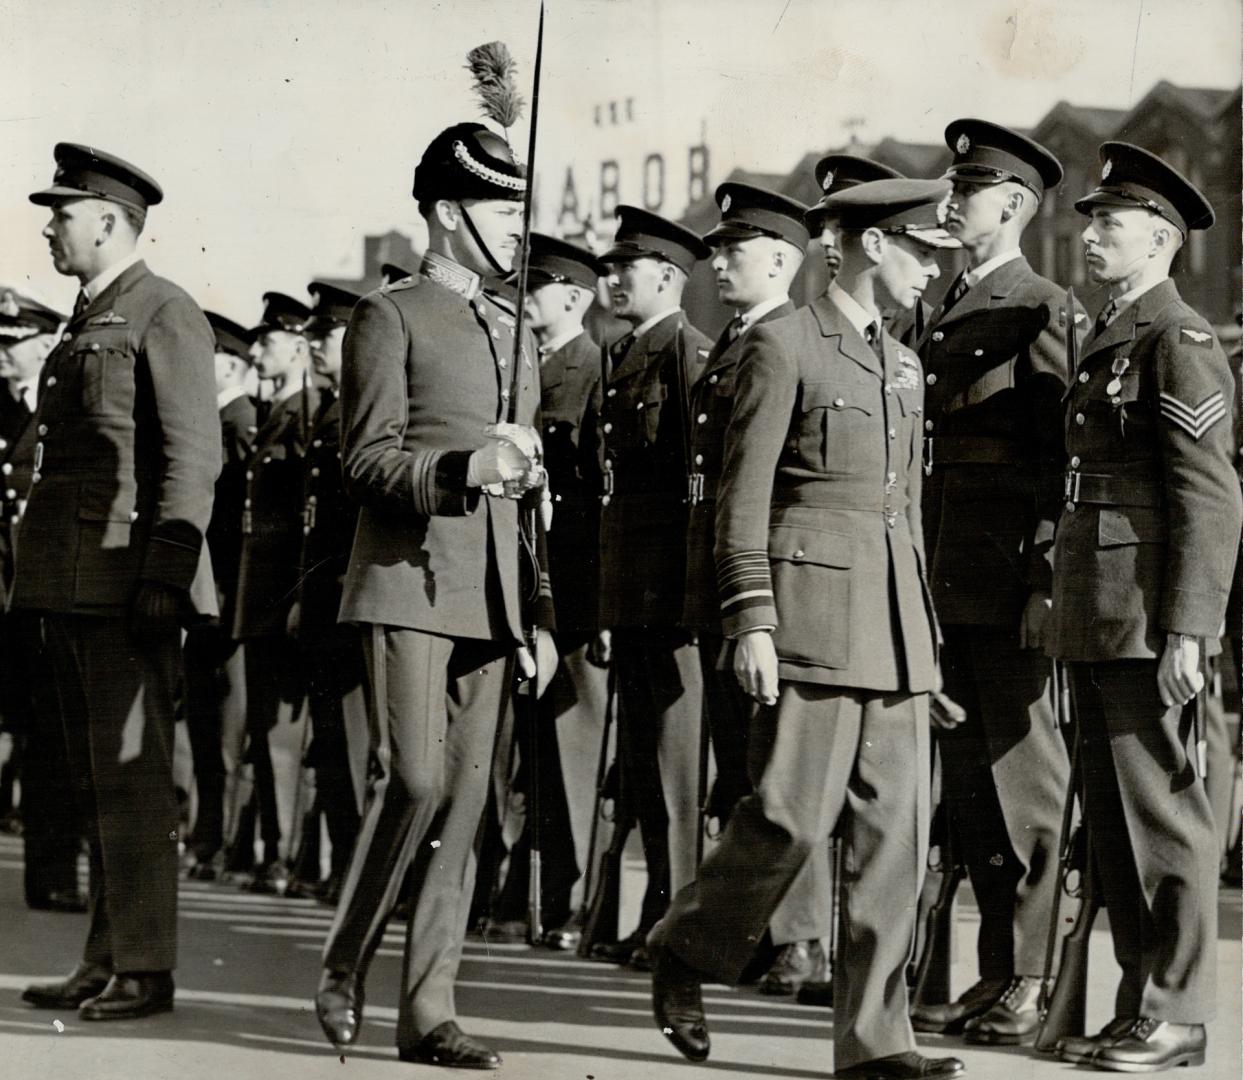 The King, wearing for the first time since the royal tour started, the undress uniform of a Royal Air Force Marshal, inspects a detachment of the Royal Canadian Air Force stationed at Vancouver